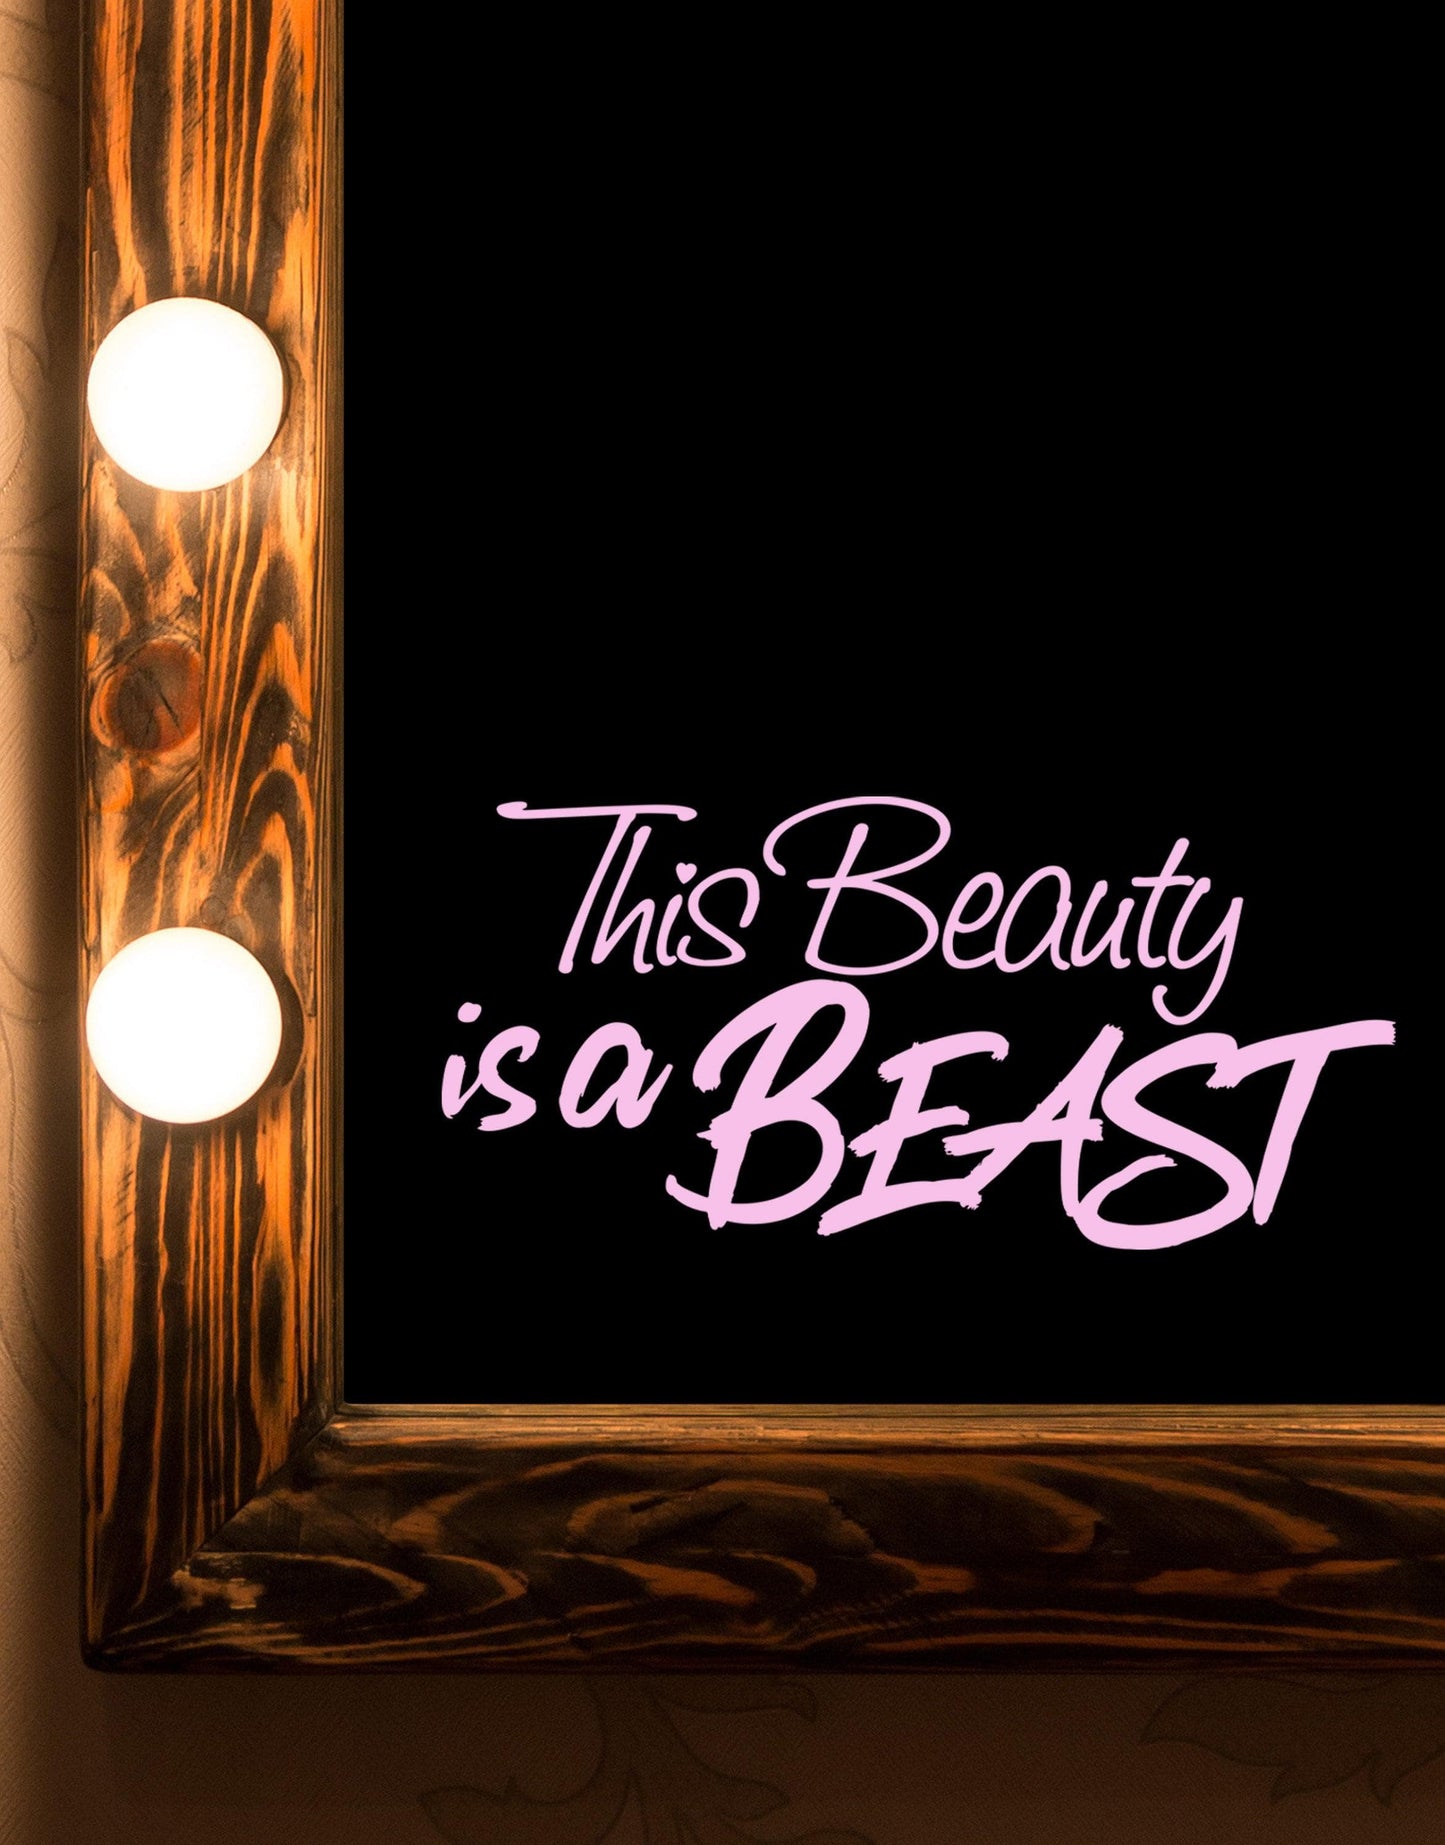 This Beauty is a Beast Motivational Self-Esteem Quote Vinyl Decal Sticker for Mirrors or Walls. Boost your Self-Confidence with Positive Thinking. #6280